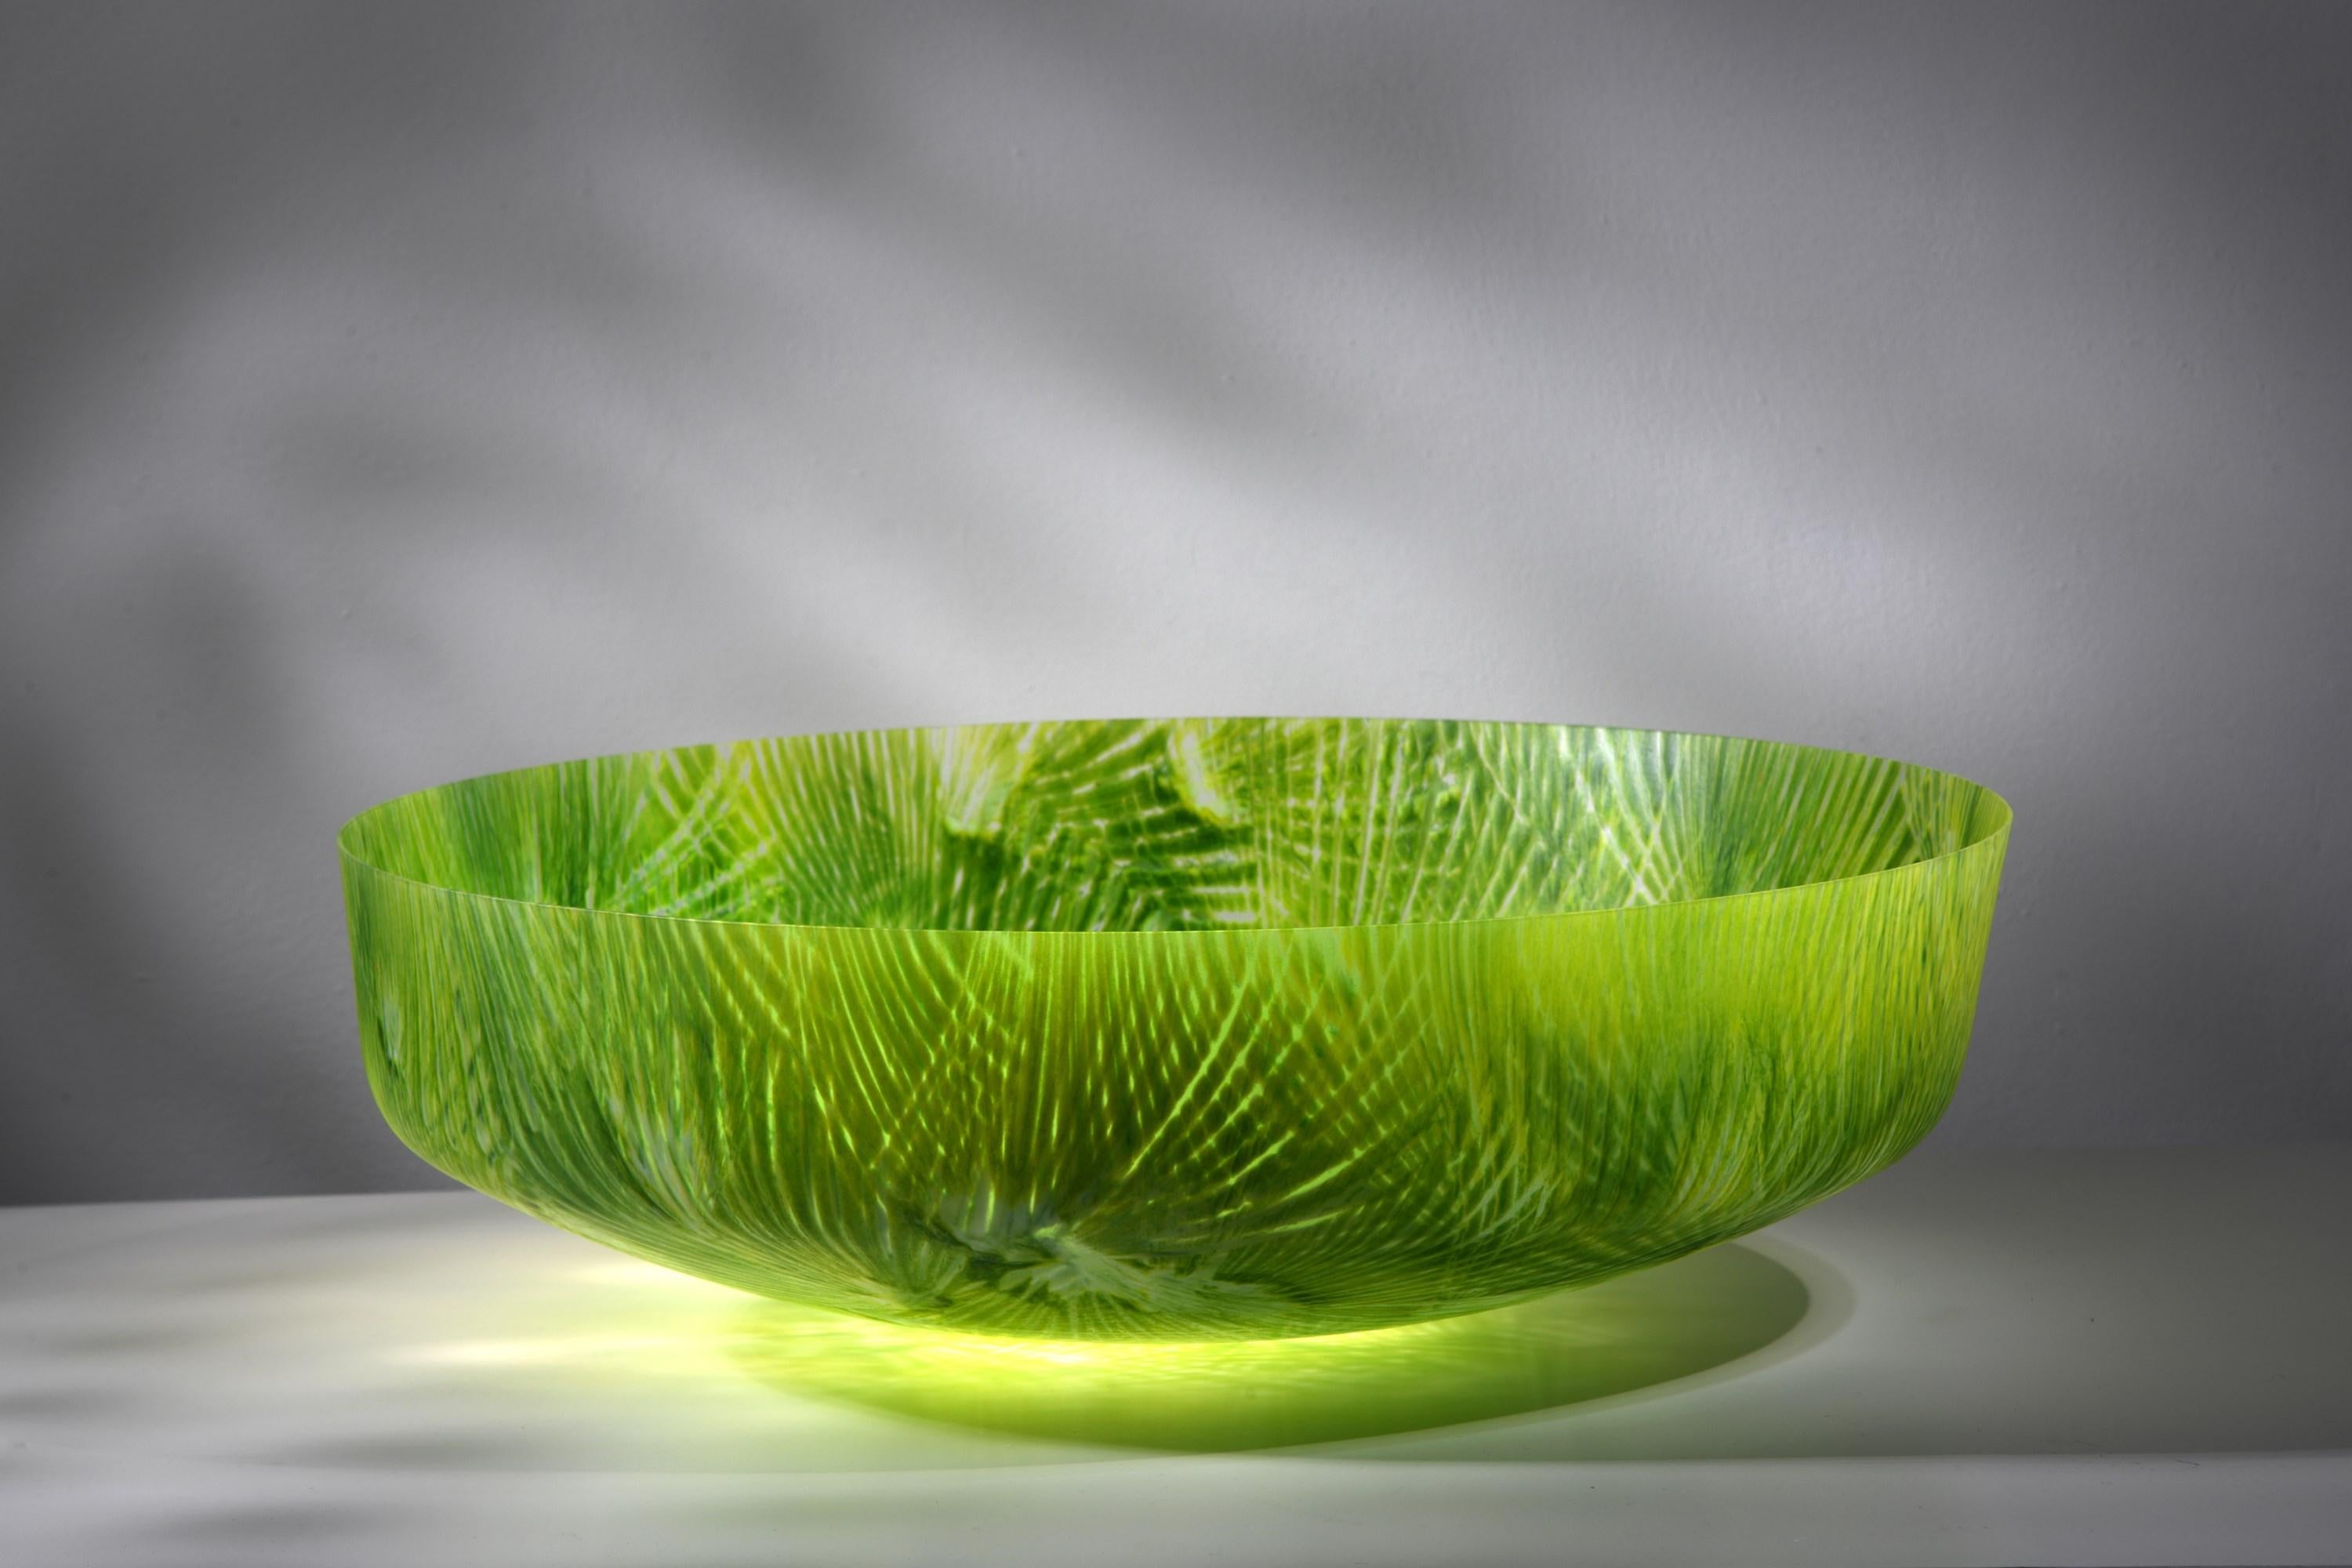 Glass Taubate, a vibrant green textured glass centrepiece by Amanda Simmons